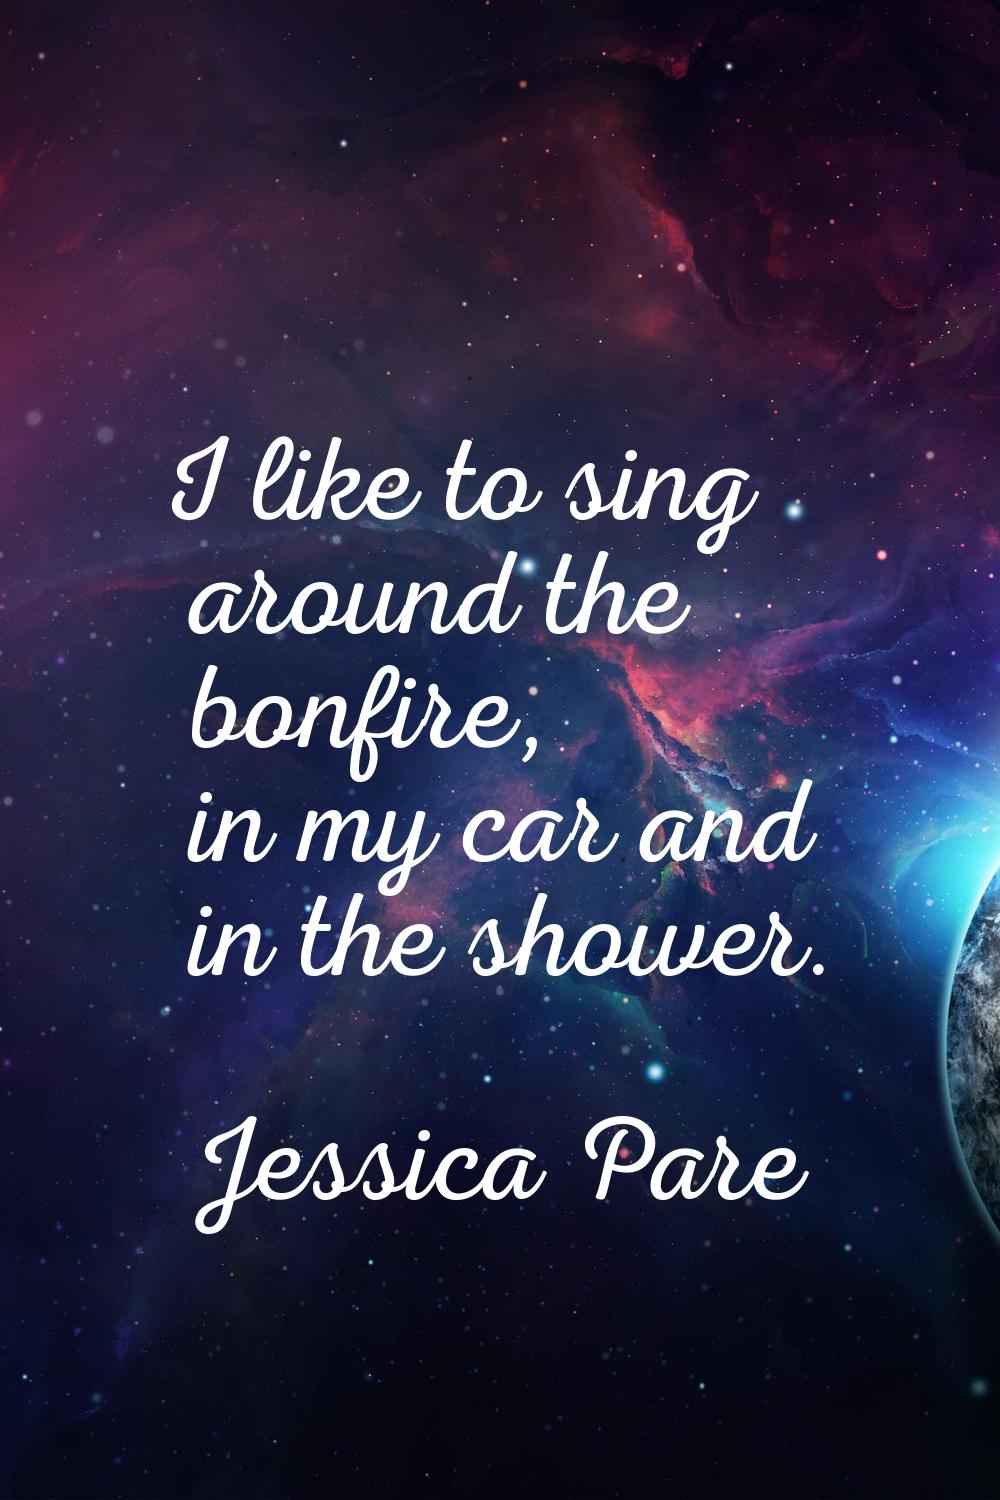 I like to sing around the bonfire, in my car and in the shower.